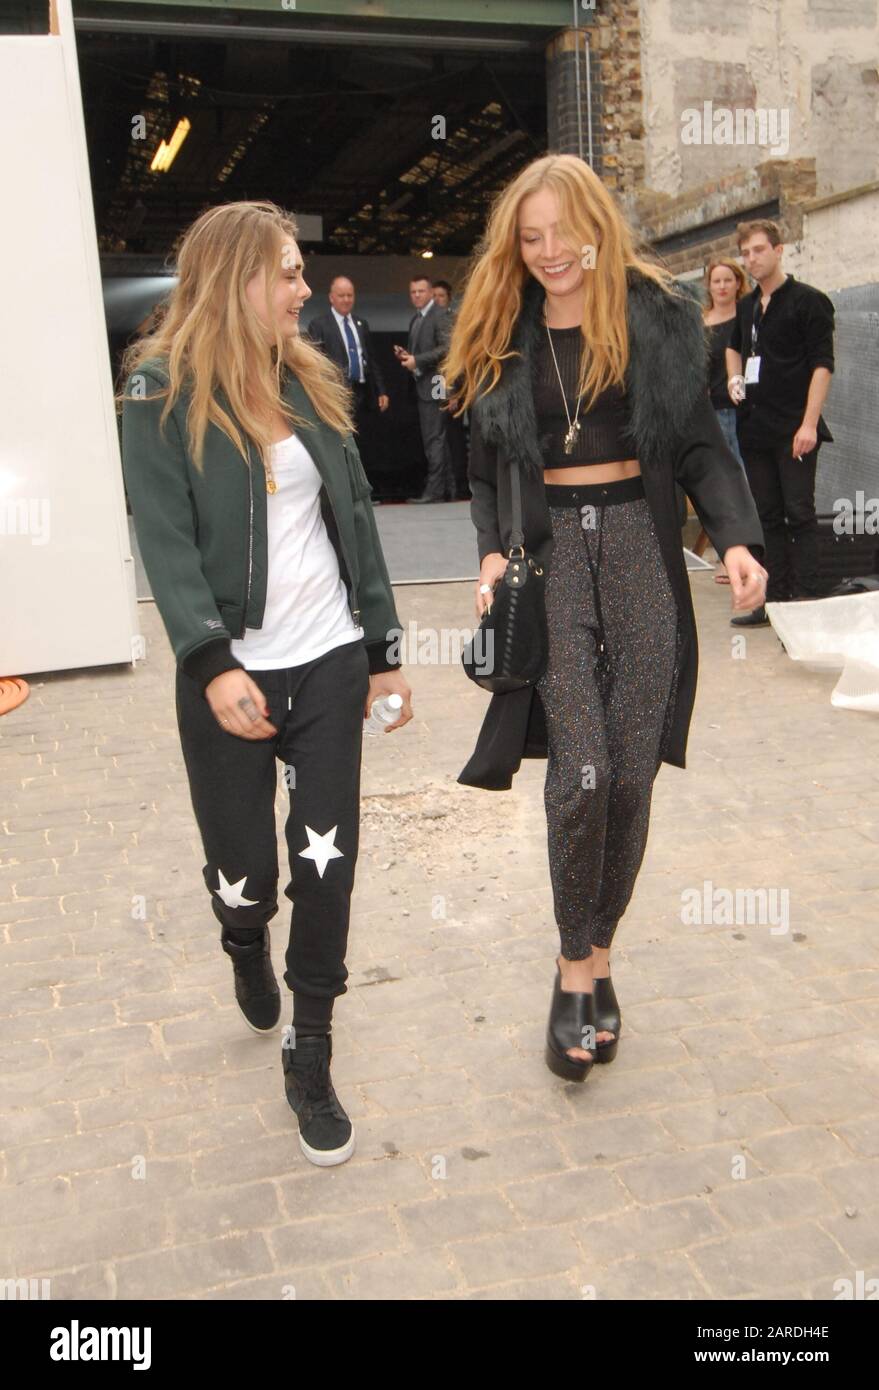 Cara Delevingne And Clara Paget The Topshop Show Space 277a Gray S Inn Road London Stock Photo Alamy